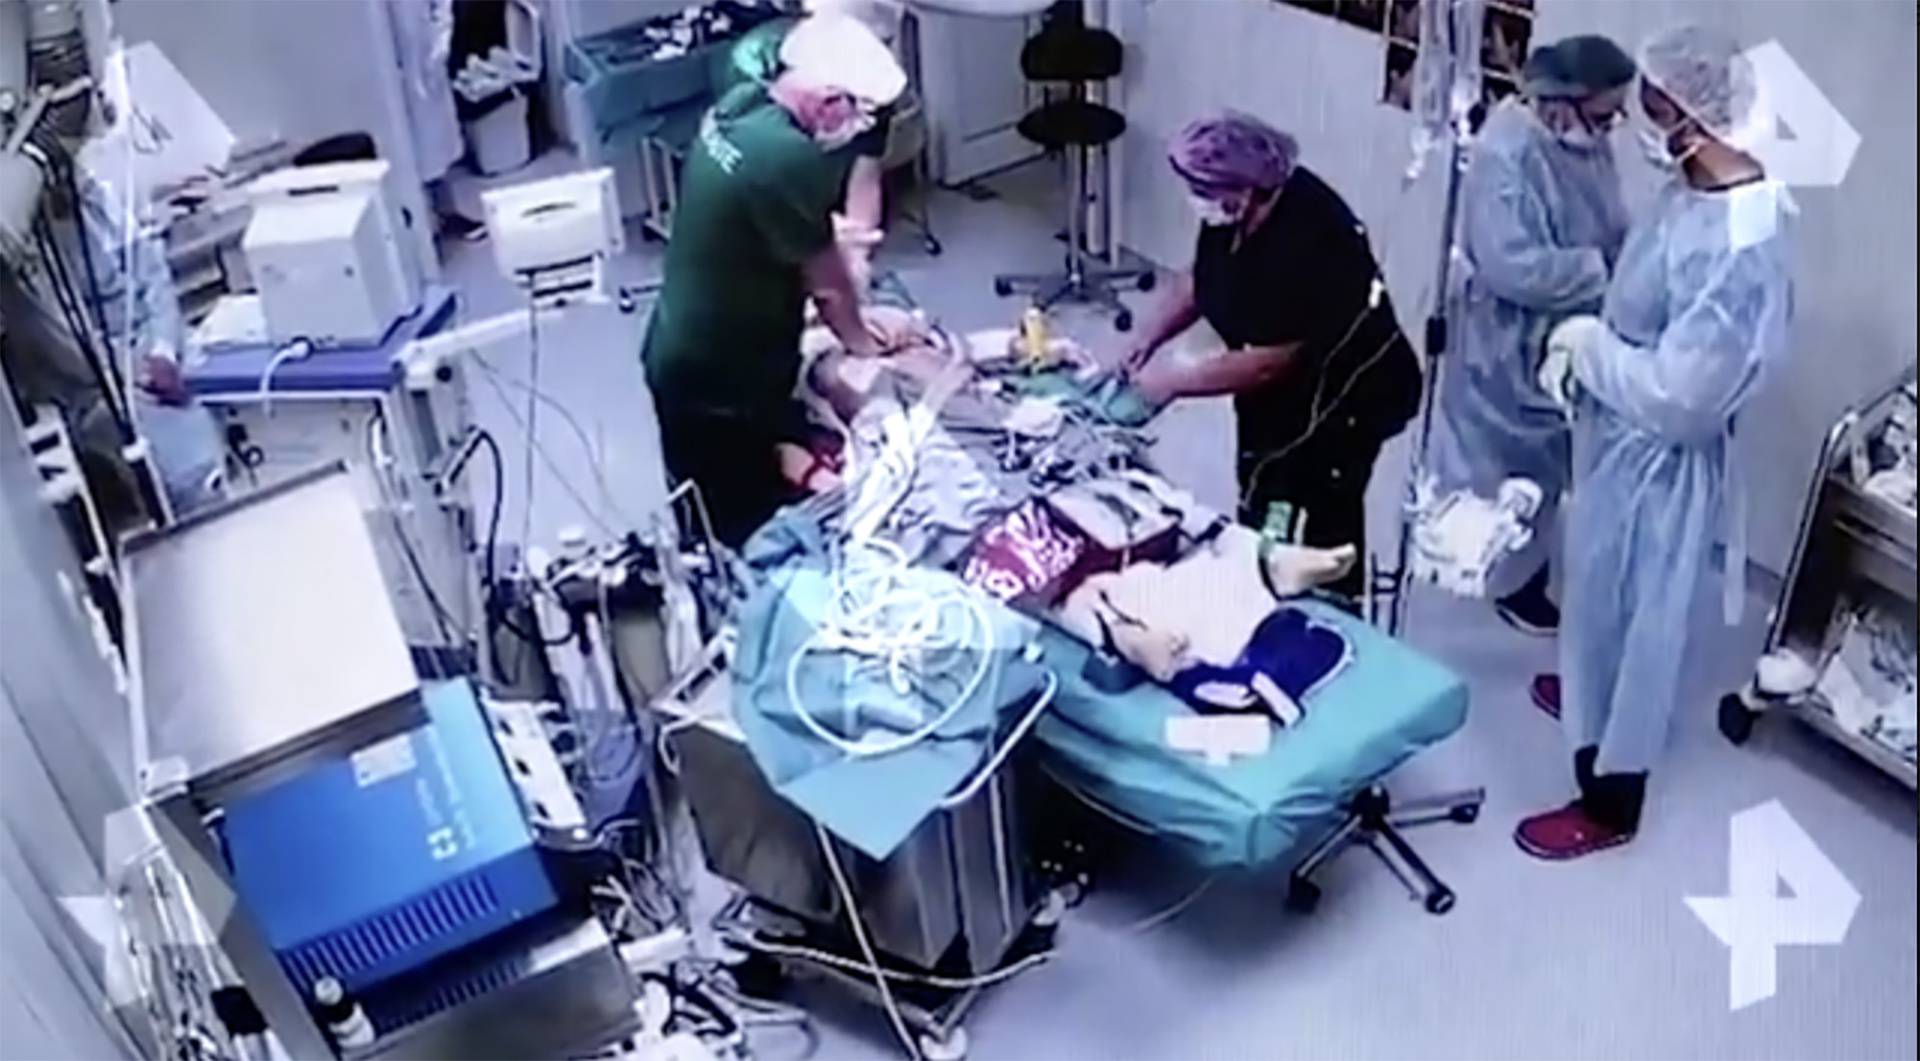 Surveillance footage shows Marina Lebedeva in the operation theatre. Marina Lebedeva, 31, died during a plastic surgery on her nose in a clinic in St Petersburg, Russia, on August 25, 2021.